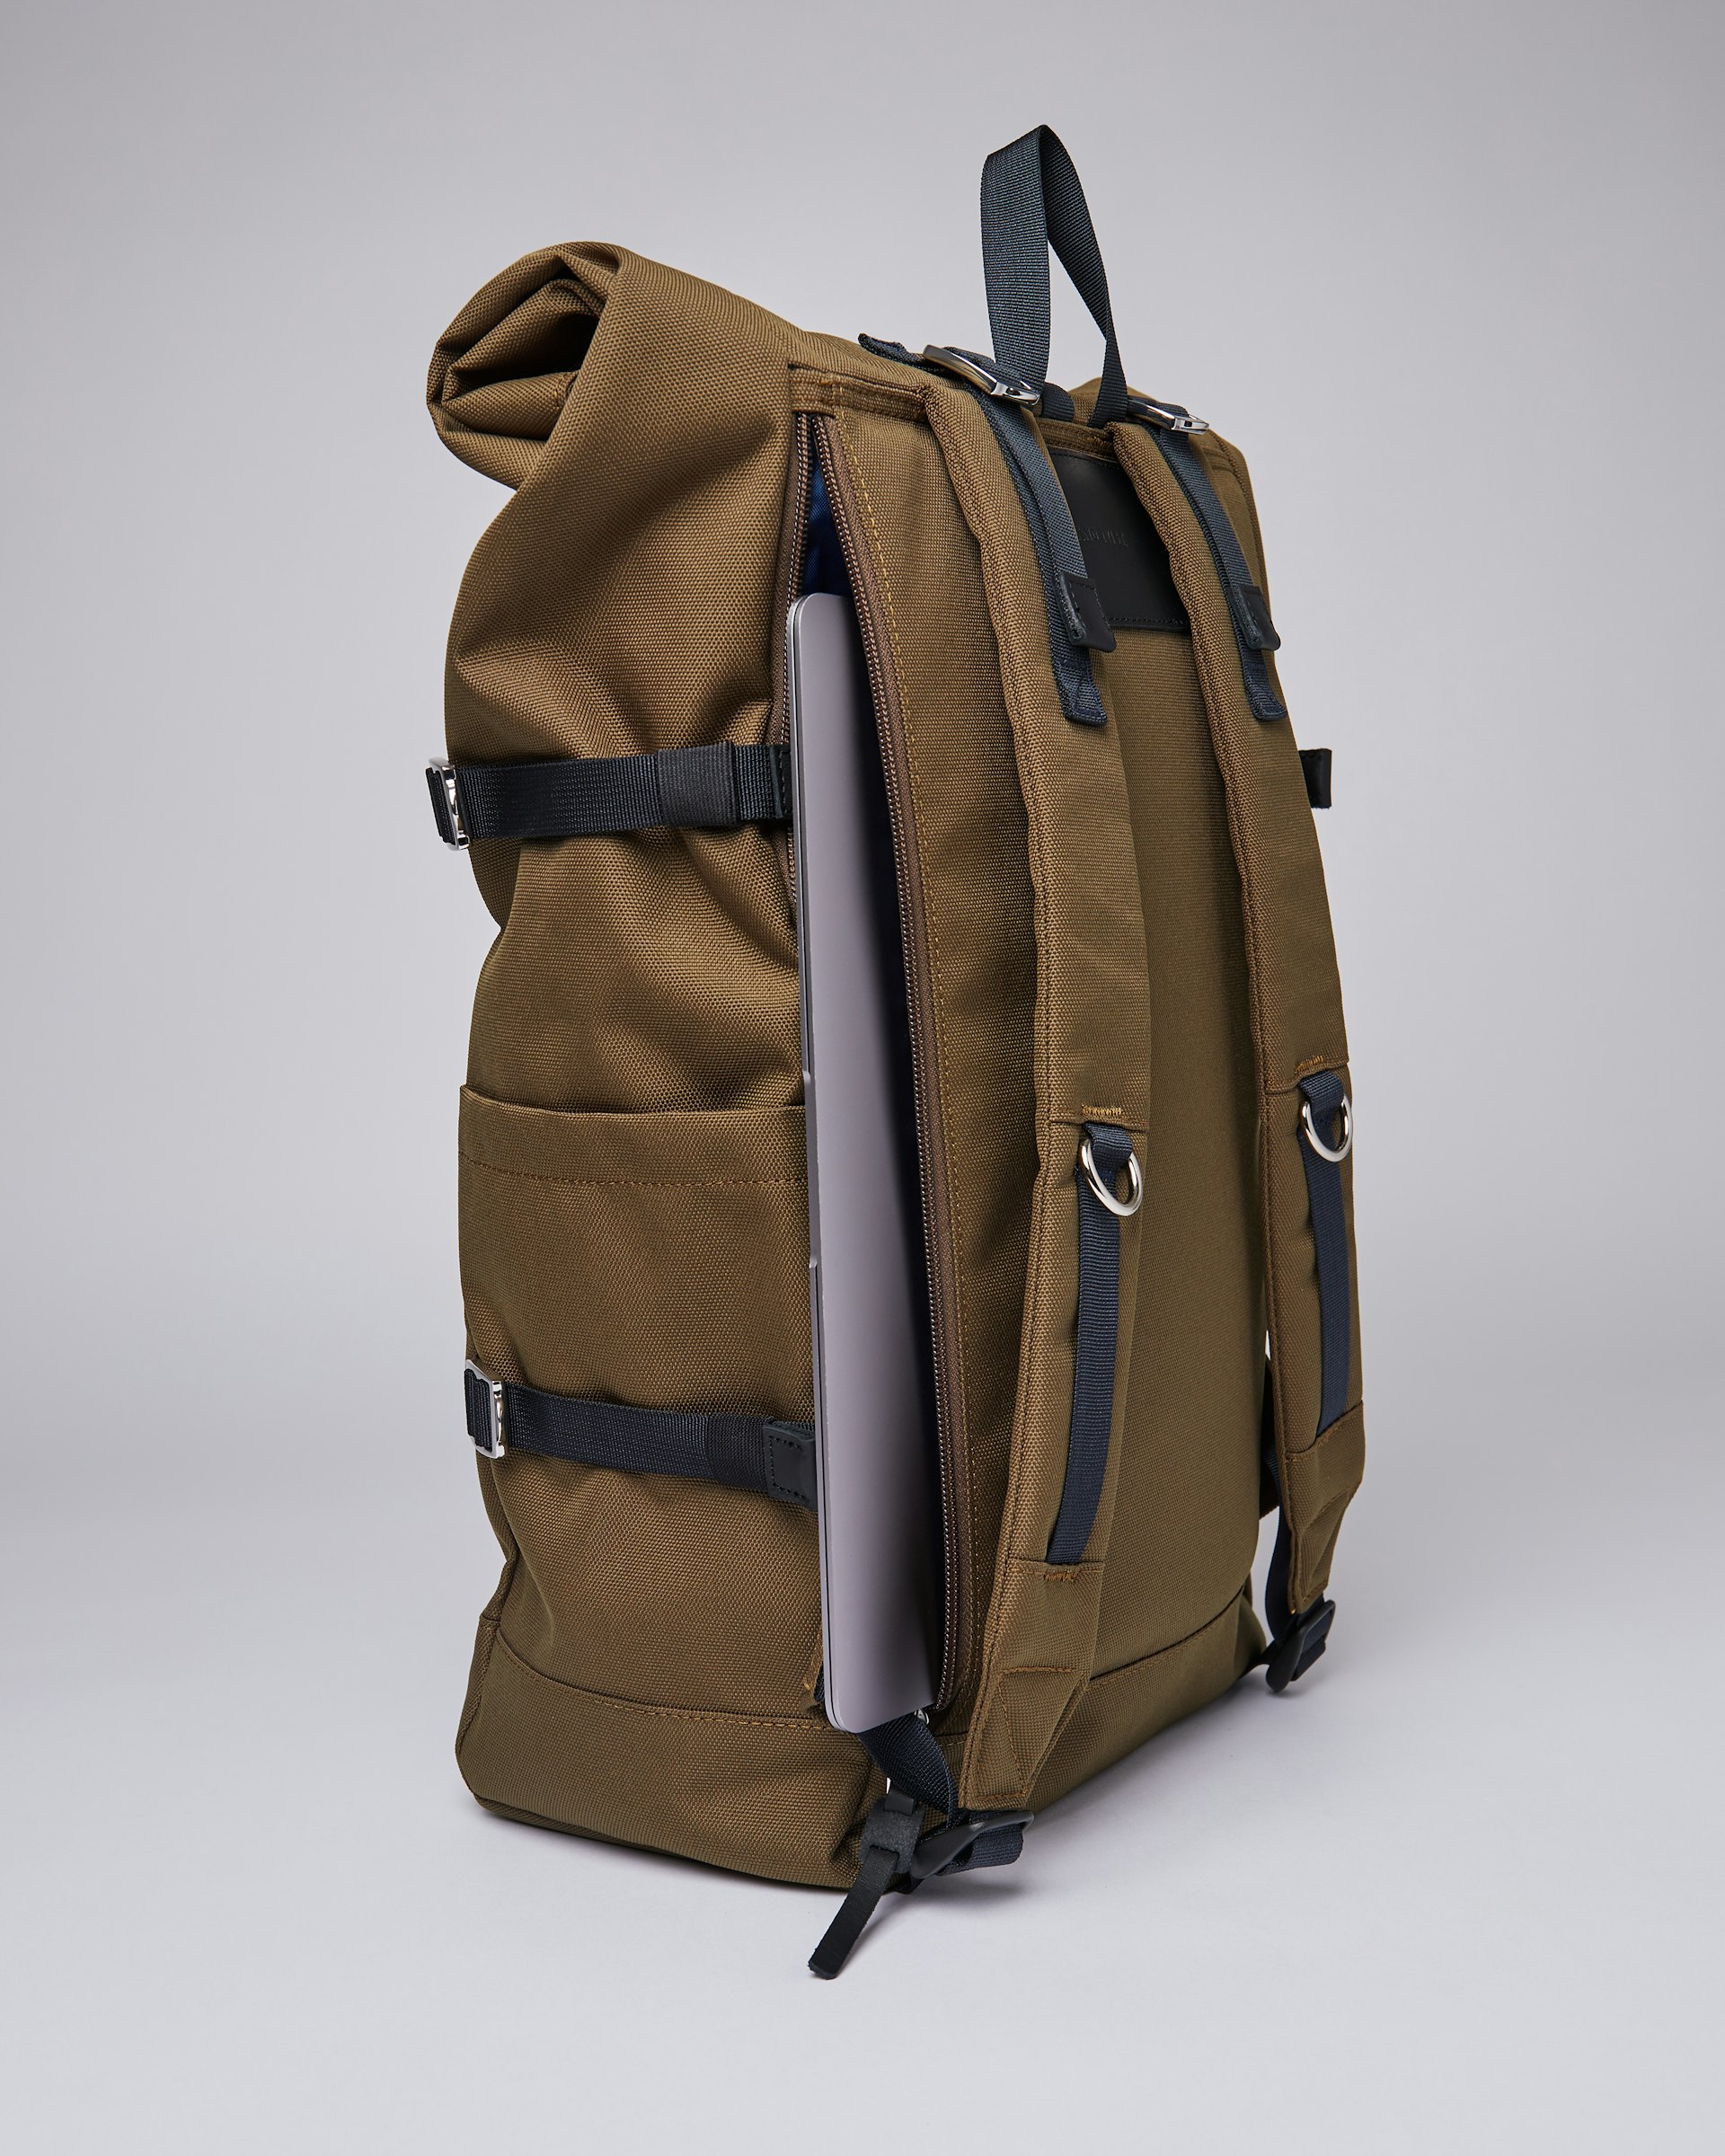 Bernt belongs to the category Backpacks and is in color olive (4 of 7)